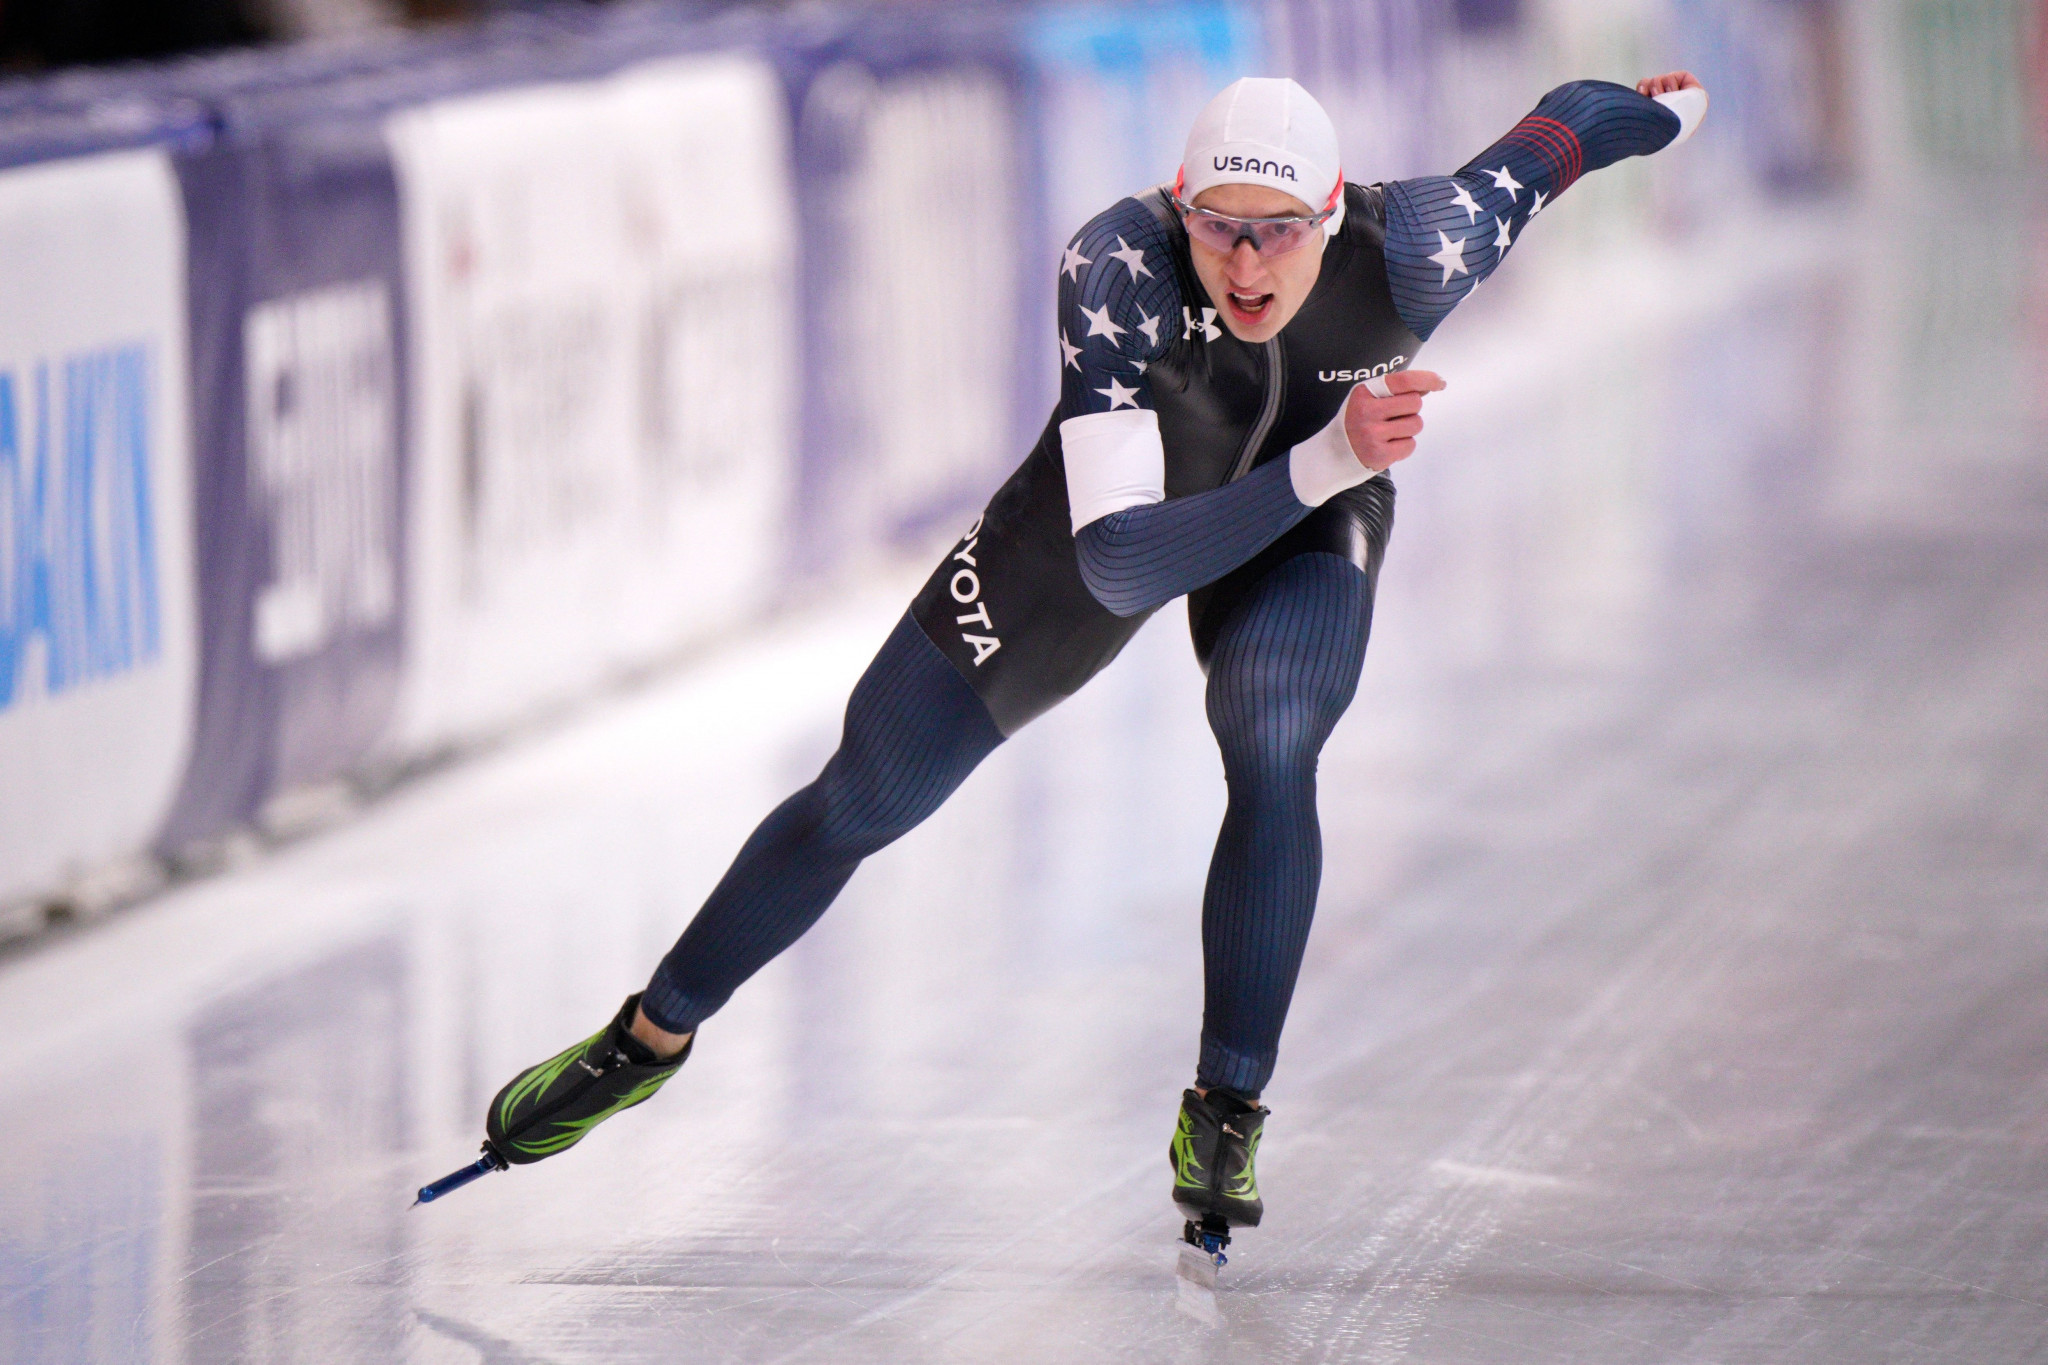 Stolz stars with 1,500m gold at ISU Speed Skating World Cup in Poland